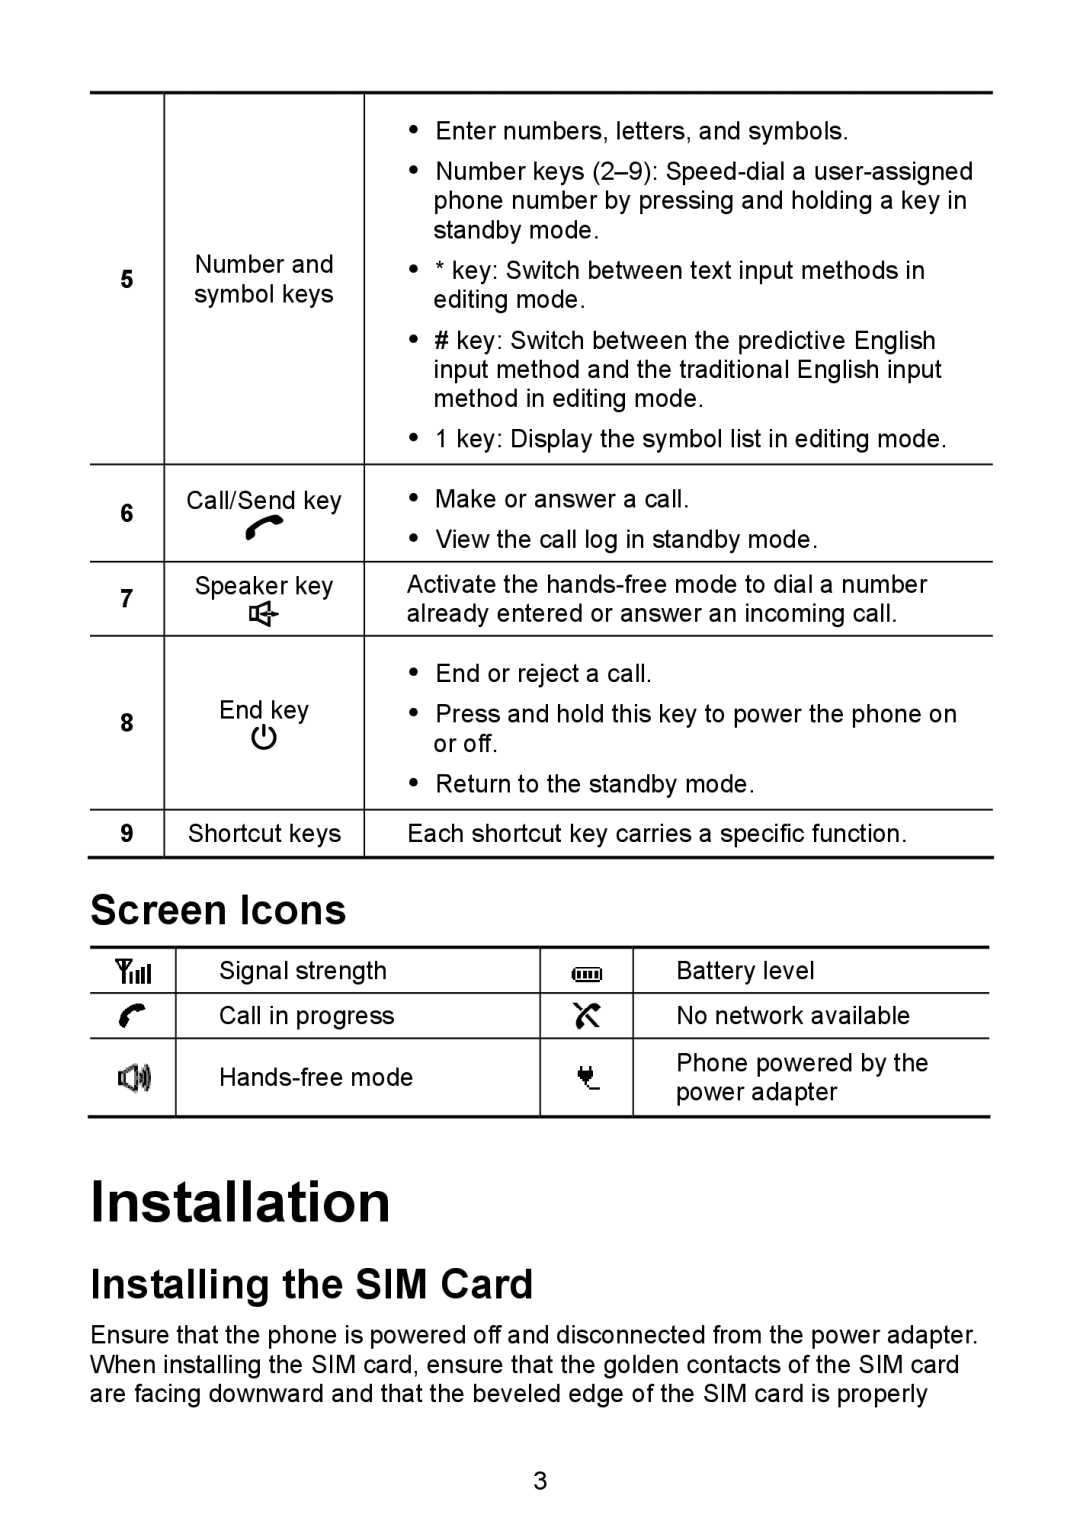 Huawei F610 manual Installation, Screen Icons, Installing the SIM Card 